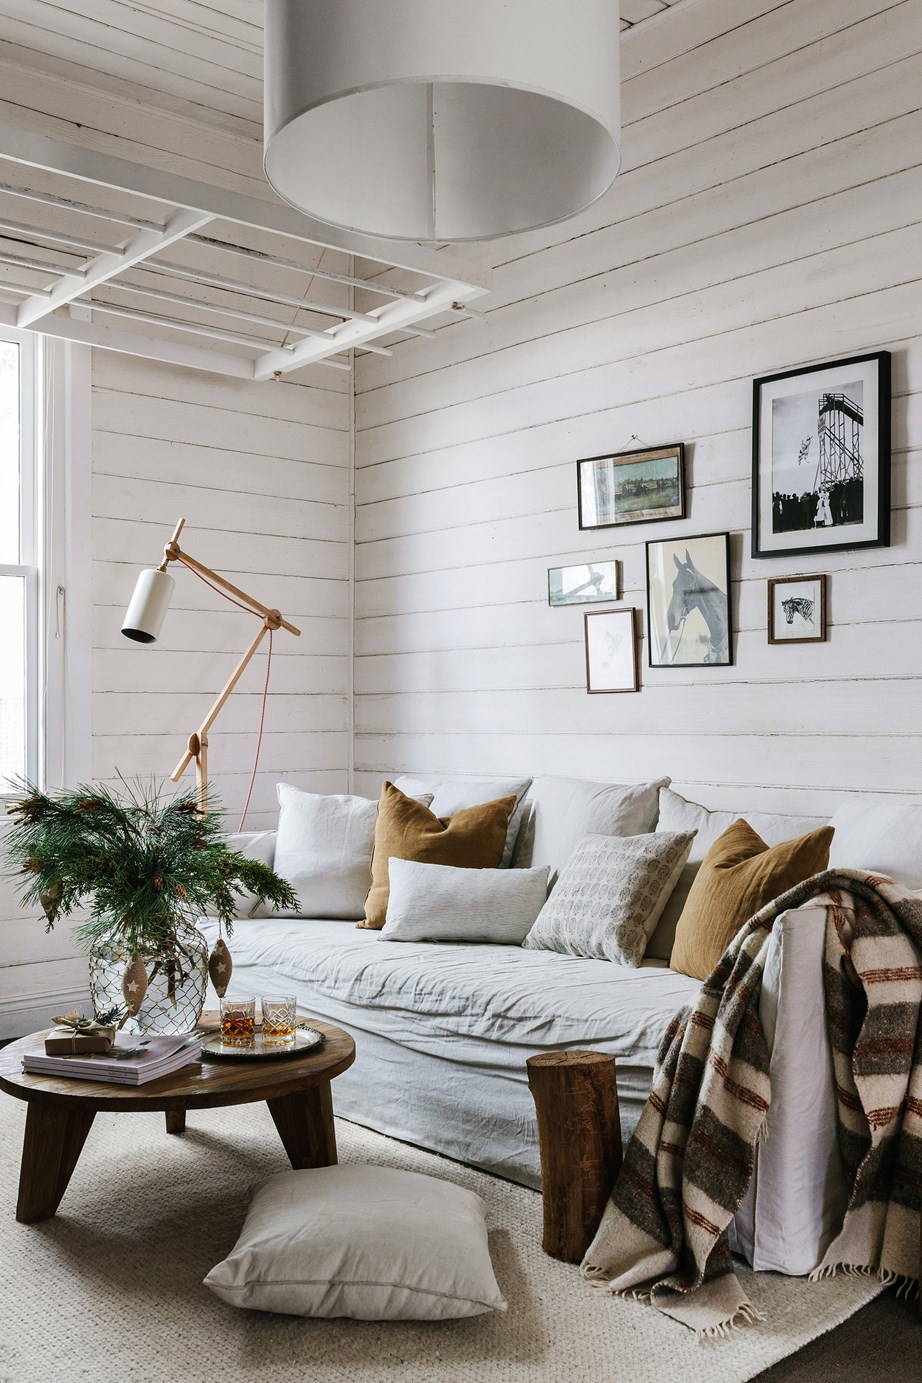 In photographer [Marnie Hawson's charming cottage in Central Victoria](https://www.homestolove.com.au/photographer-marnie-hawson-cottage-victoria-20958|target="_blank"), heritage details remind you of the home's past, while modern furniture makes it feel fresh and comfortable. Beneath an original clothes hanger is a MCM House sofa, coffee table and cushions from Trentham General, and an Armadillo & Co rug.